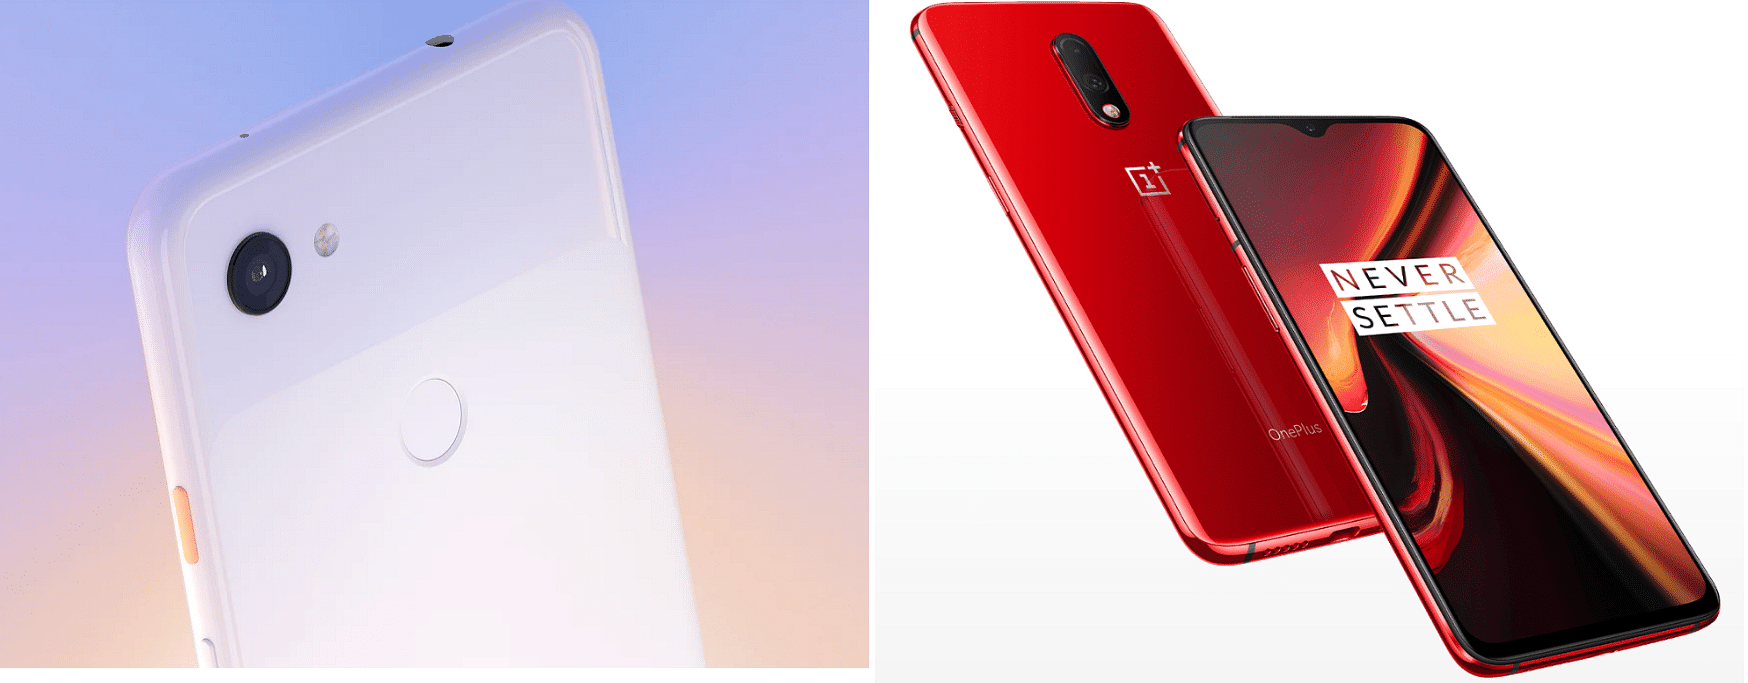 OnePlus 7 series and the Pixel 3a series fight in the same price segments in India